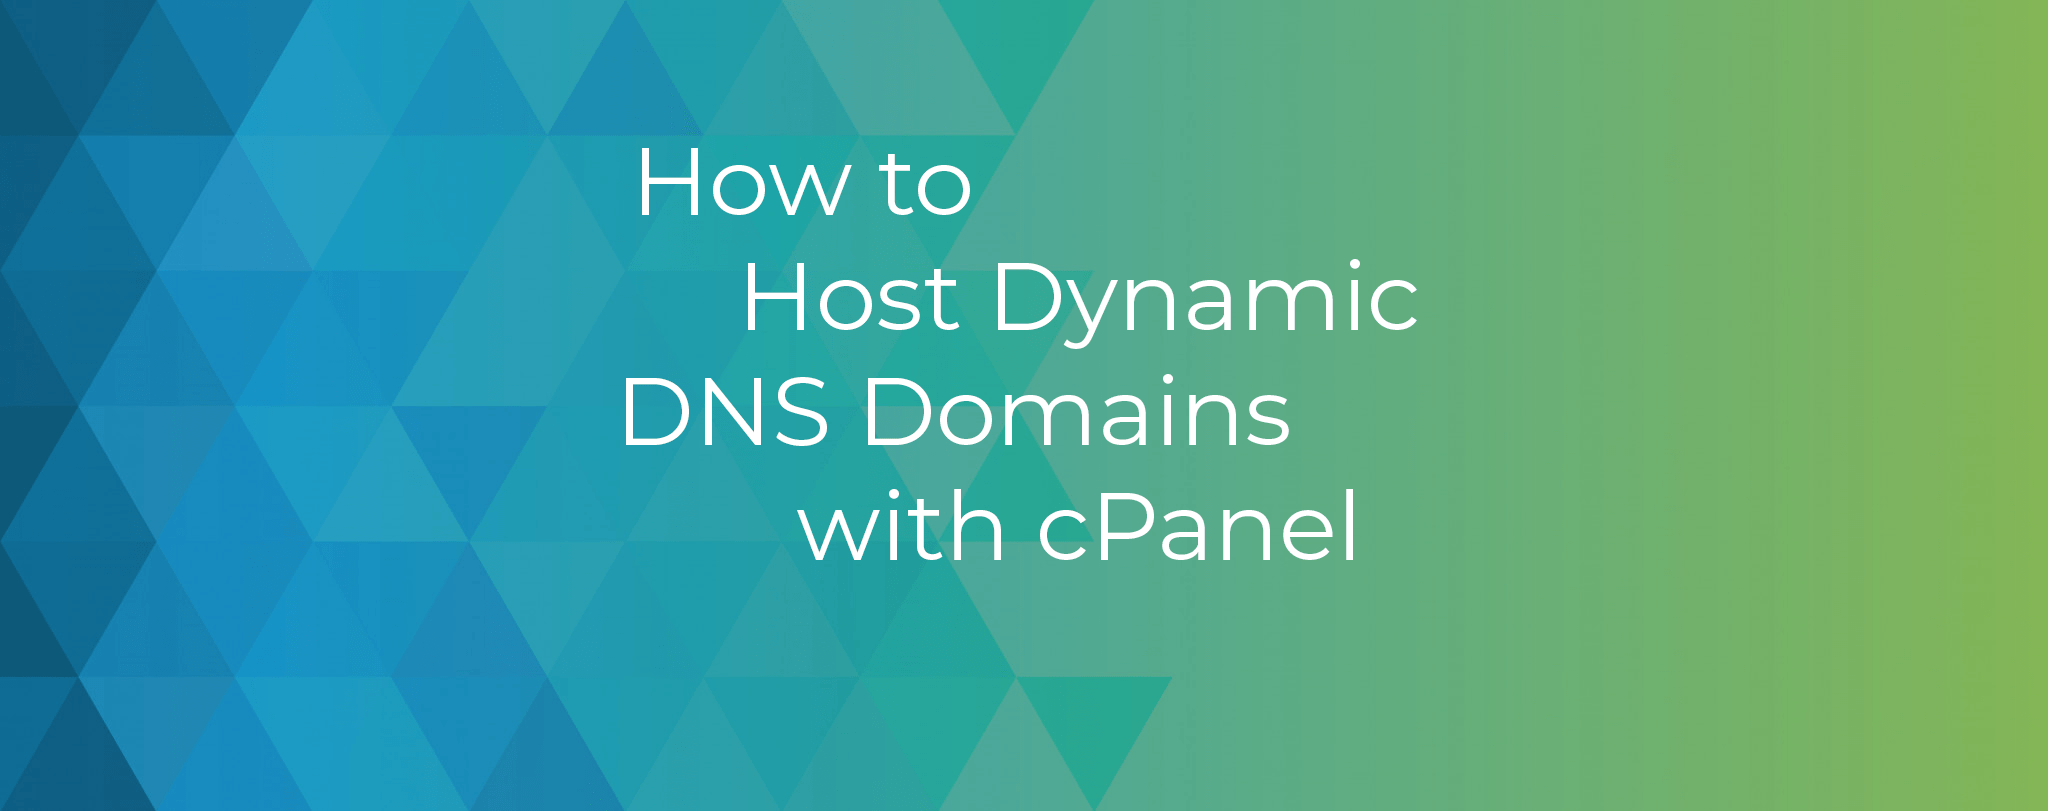 How to Host Dynamic DNS Domains with cPanel